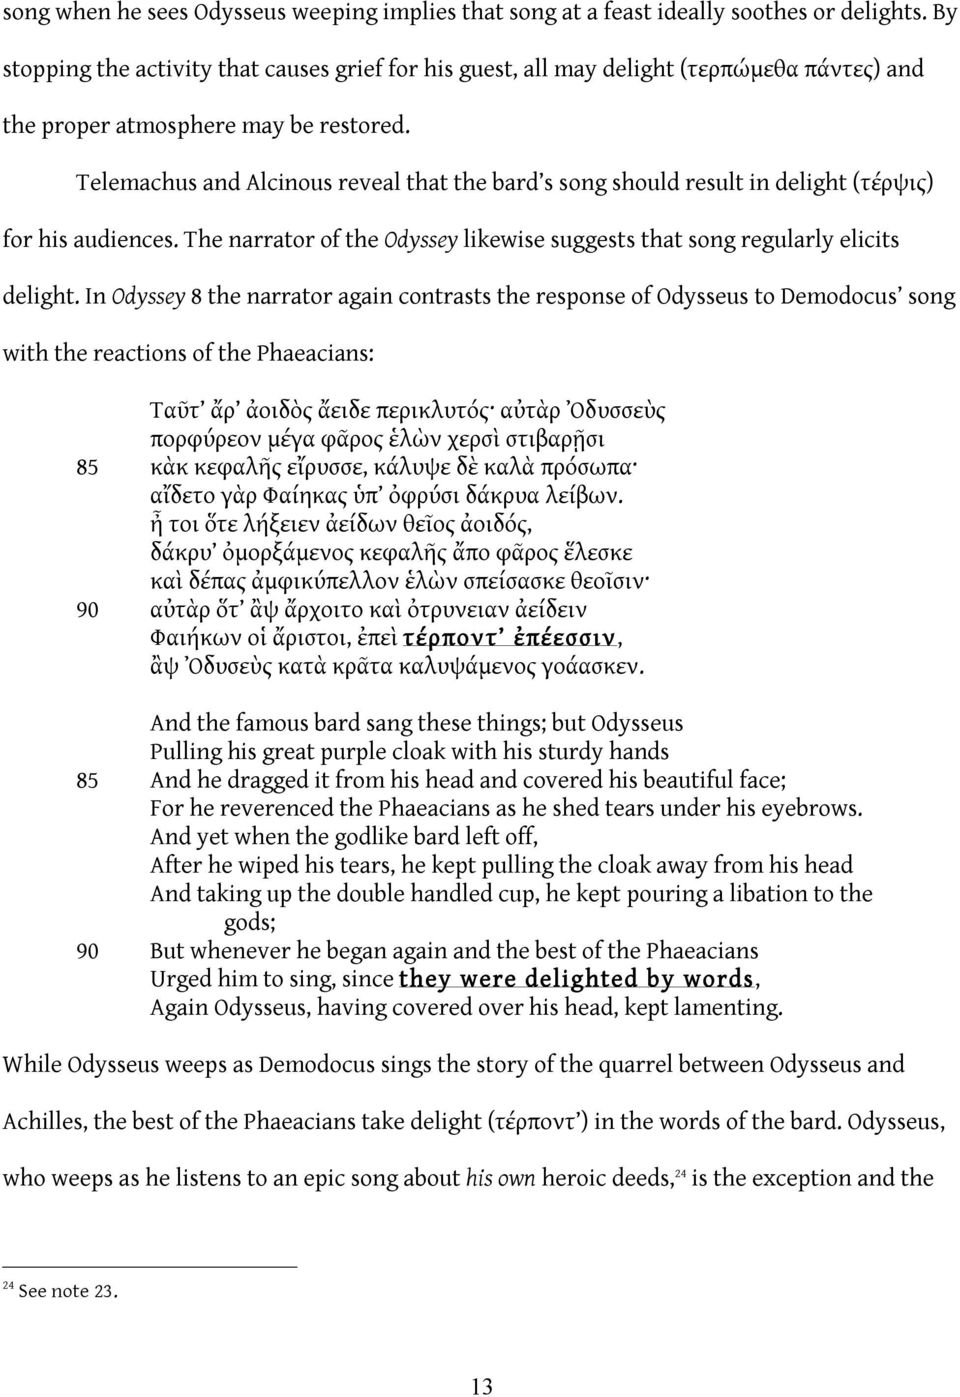 Telemachus and Alcinous reveal that the bard s song should result in delight (τέρψις) for his audiences. The narrator of the Odyssey likewise suggests that song regularly elicits delight.